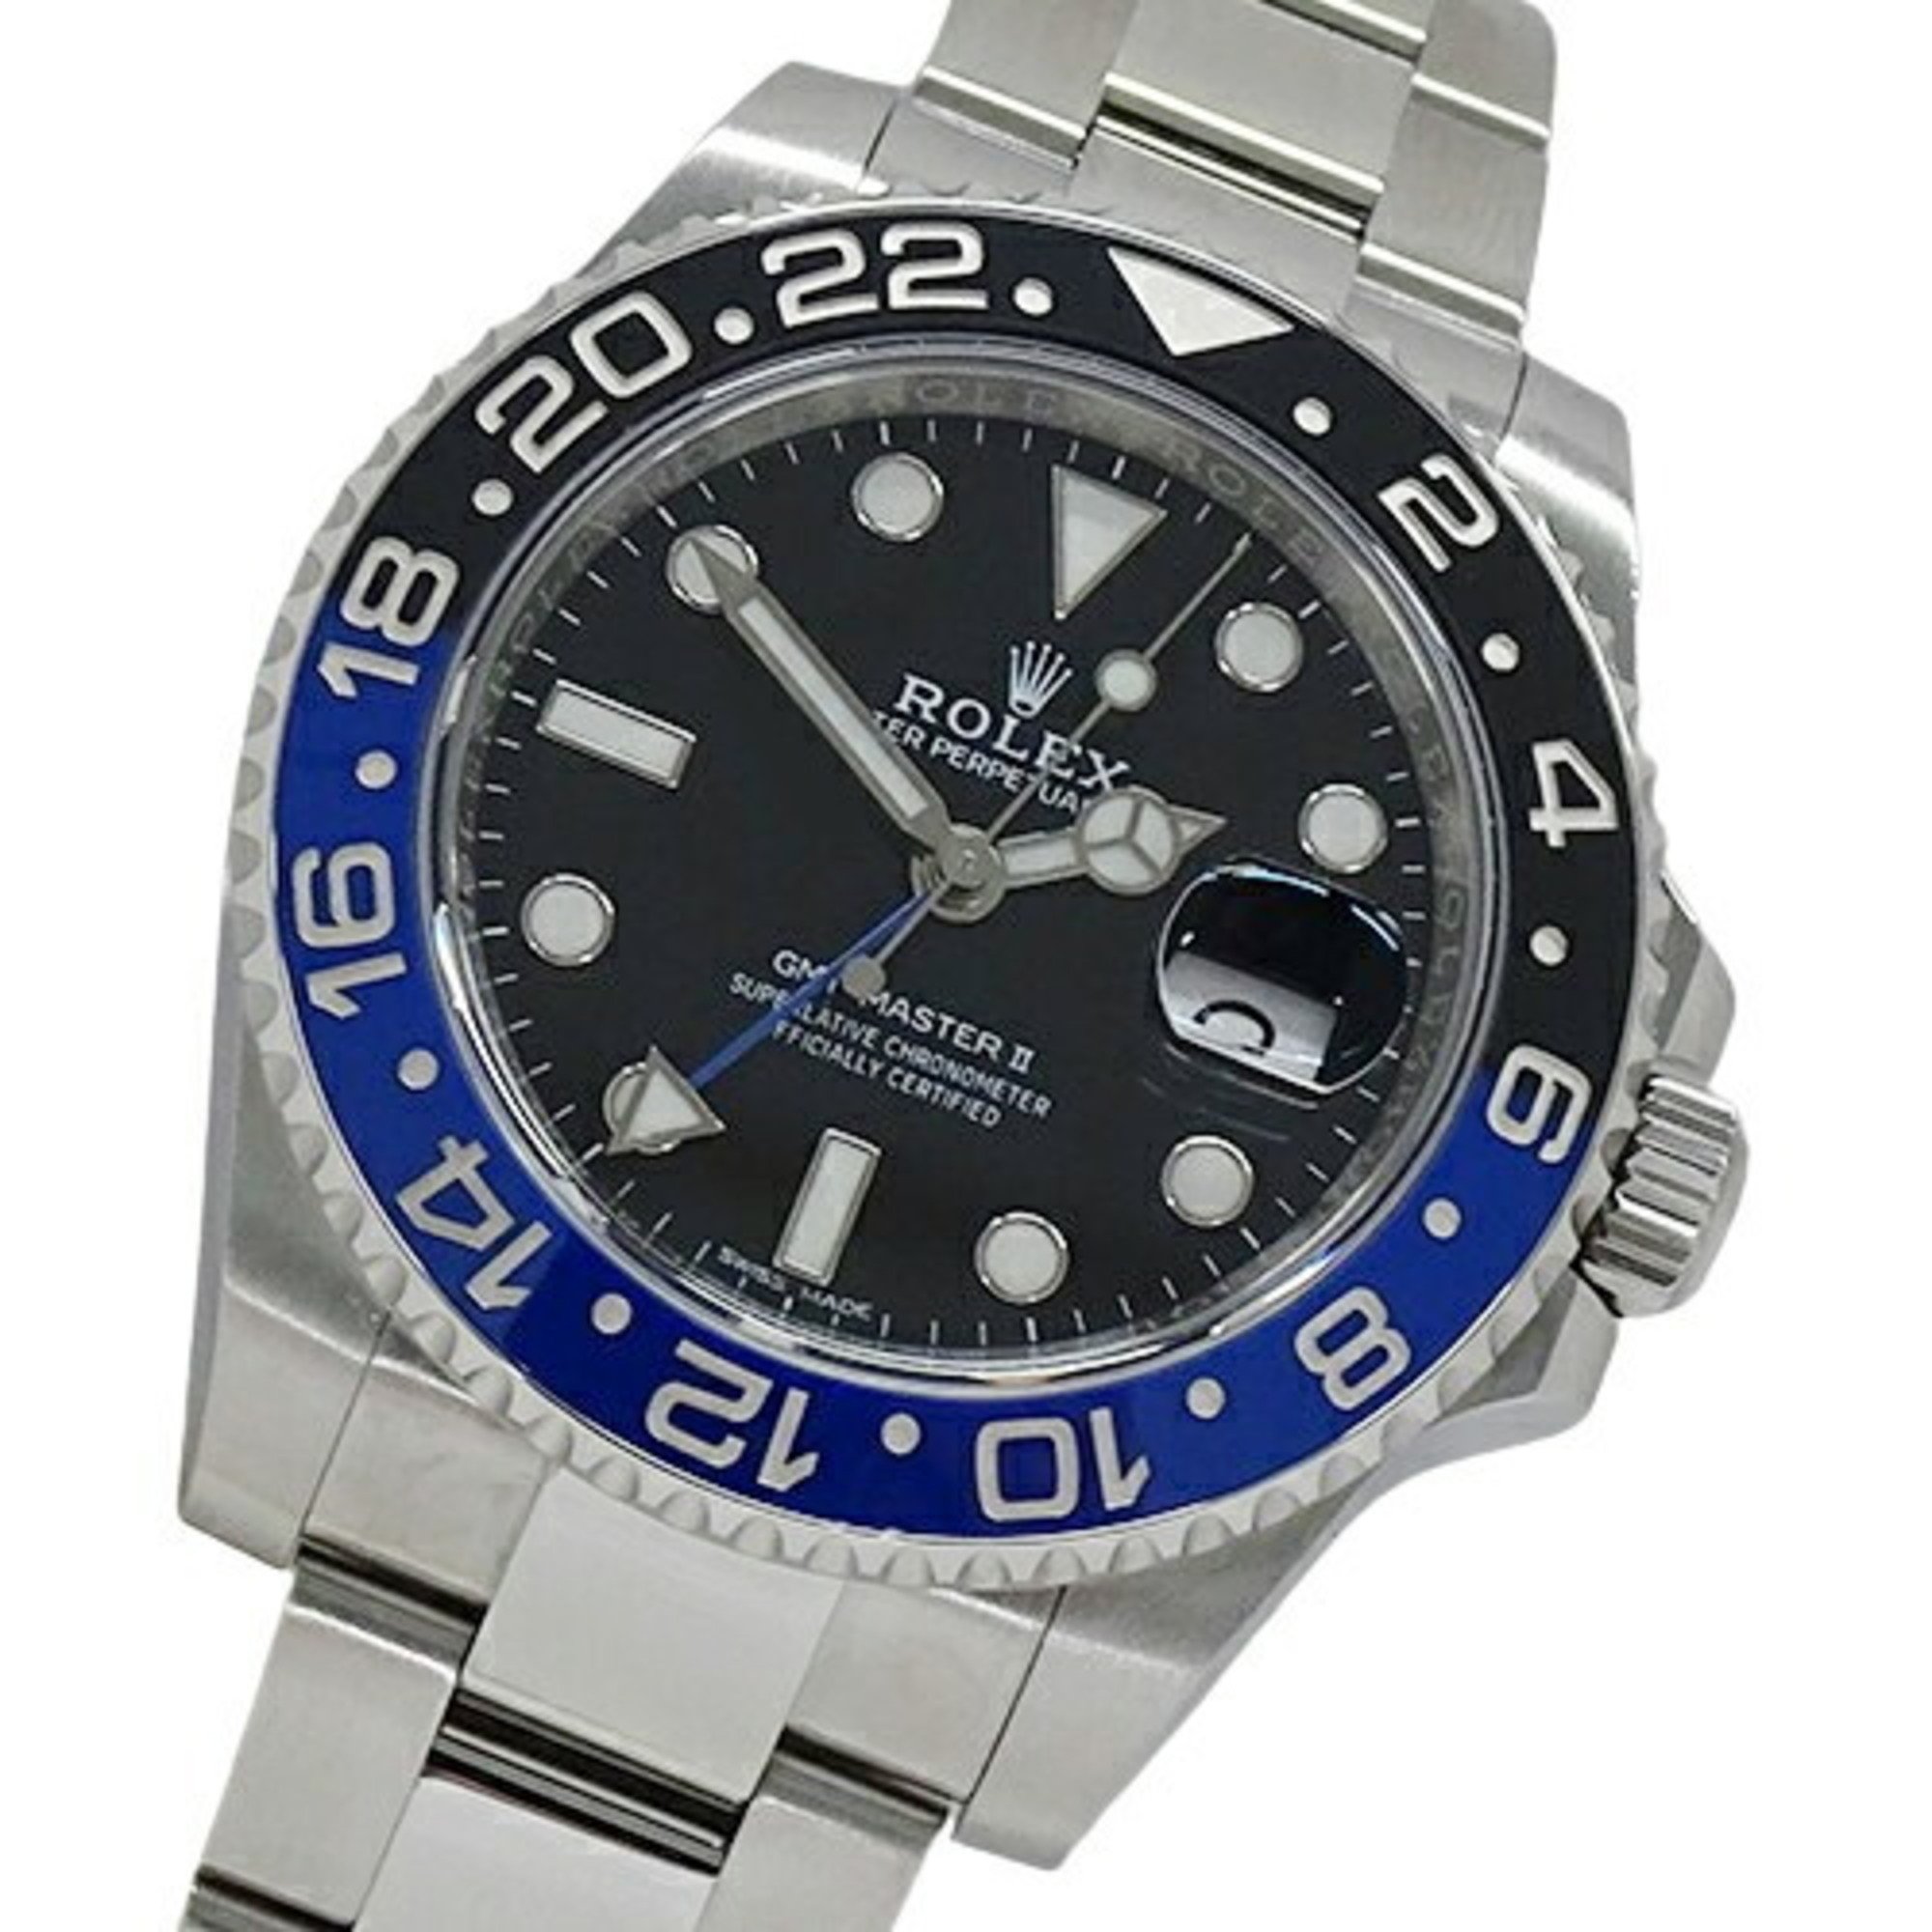 Rolex ROLEX GMT Master II 116710BLNR Random Number Watch Men's Batman Automatic AT Stainless Steel SS Silver Blue Black and Polished